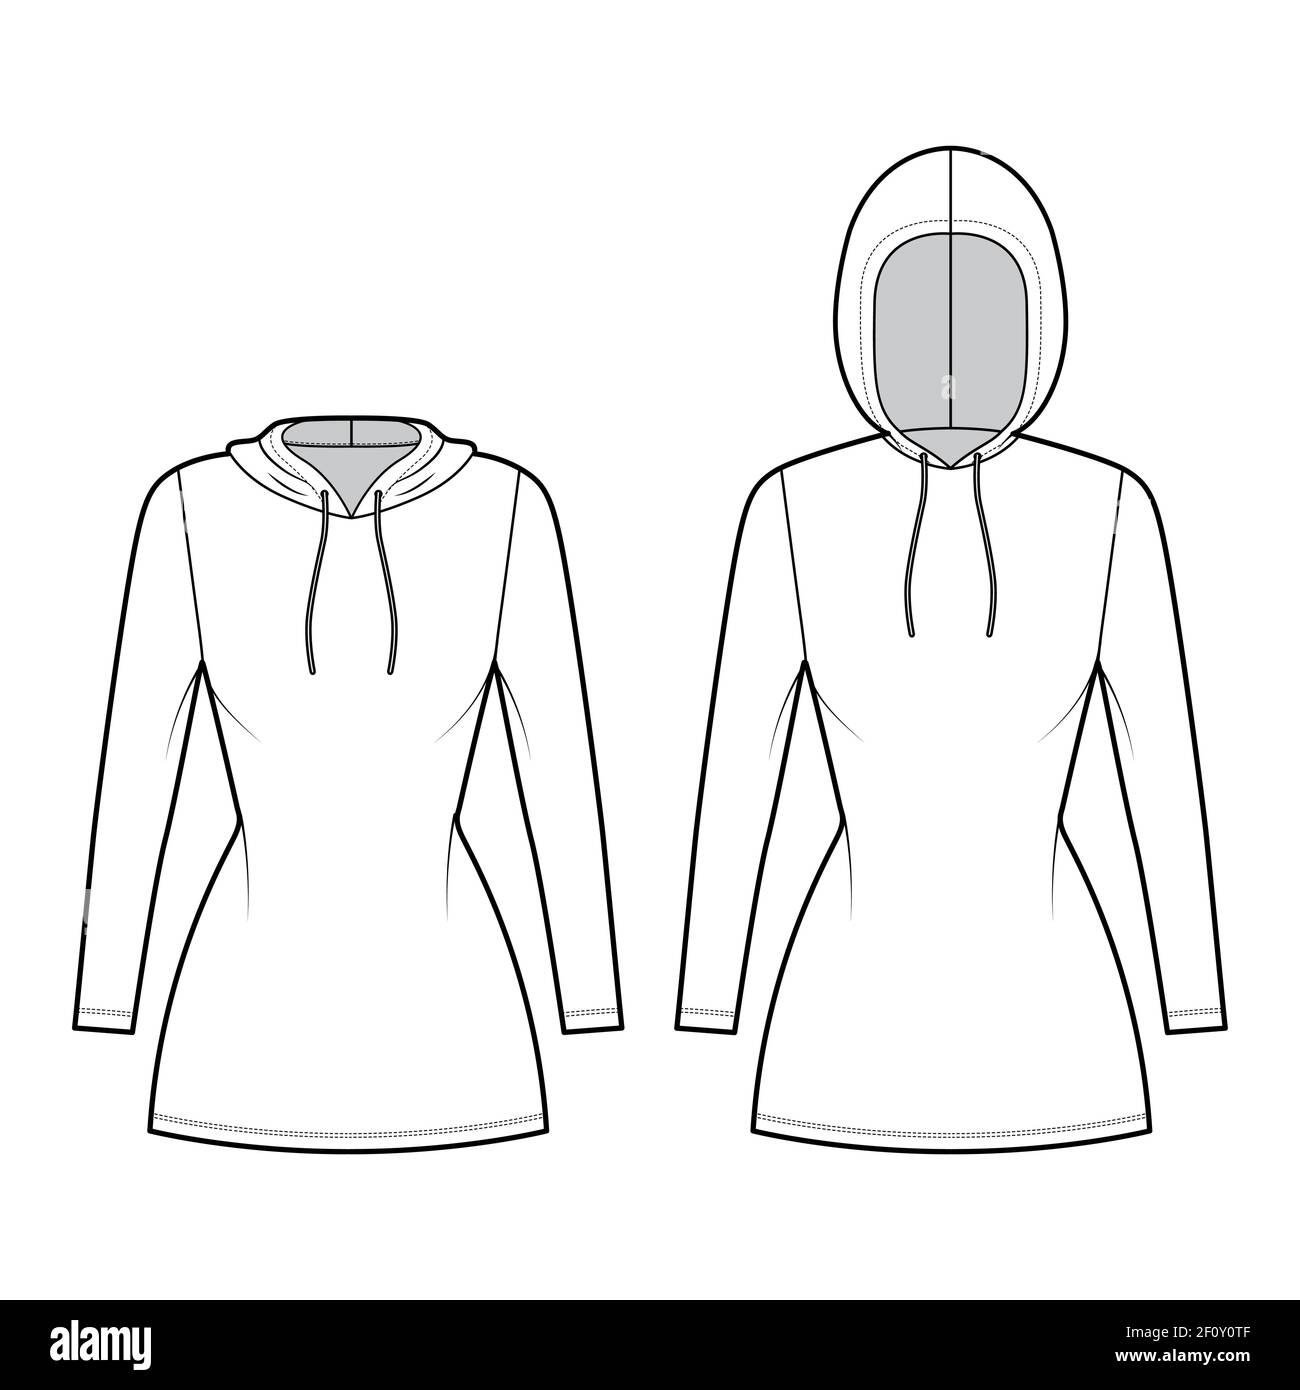 Set of Hoody dresses technical fashion illustration with long sleeves, mini length, fitted body, Pencil fullness. Flat sweater apparel template front, white color style. Women, men, unisex CAD mockup Stock Vector